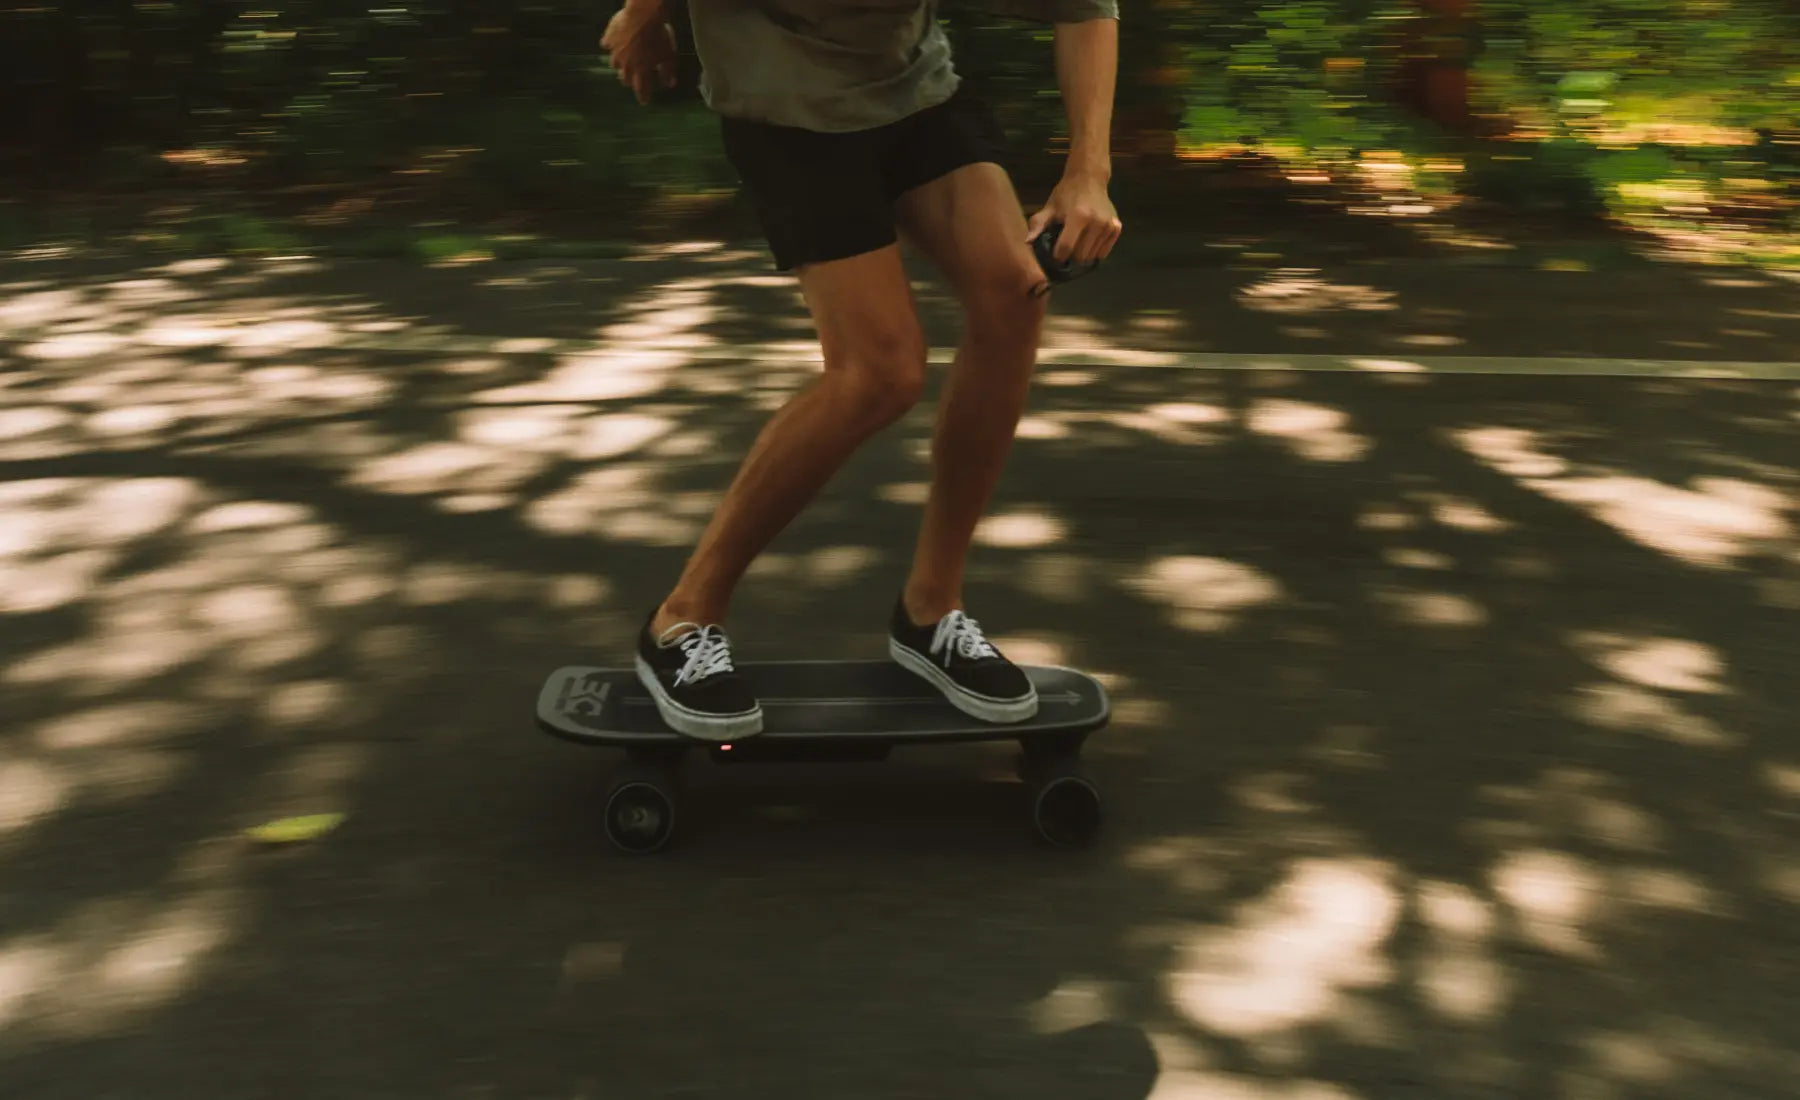 HOW TO ESKATE - THE ULTIMATE ELECTRIC SKATEBOARDING GUIDE - BASE CAMP BOARDS